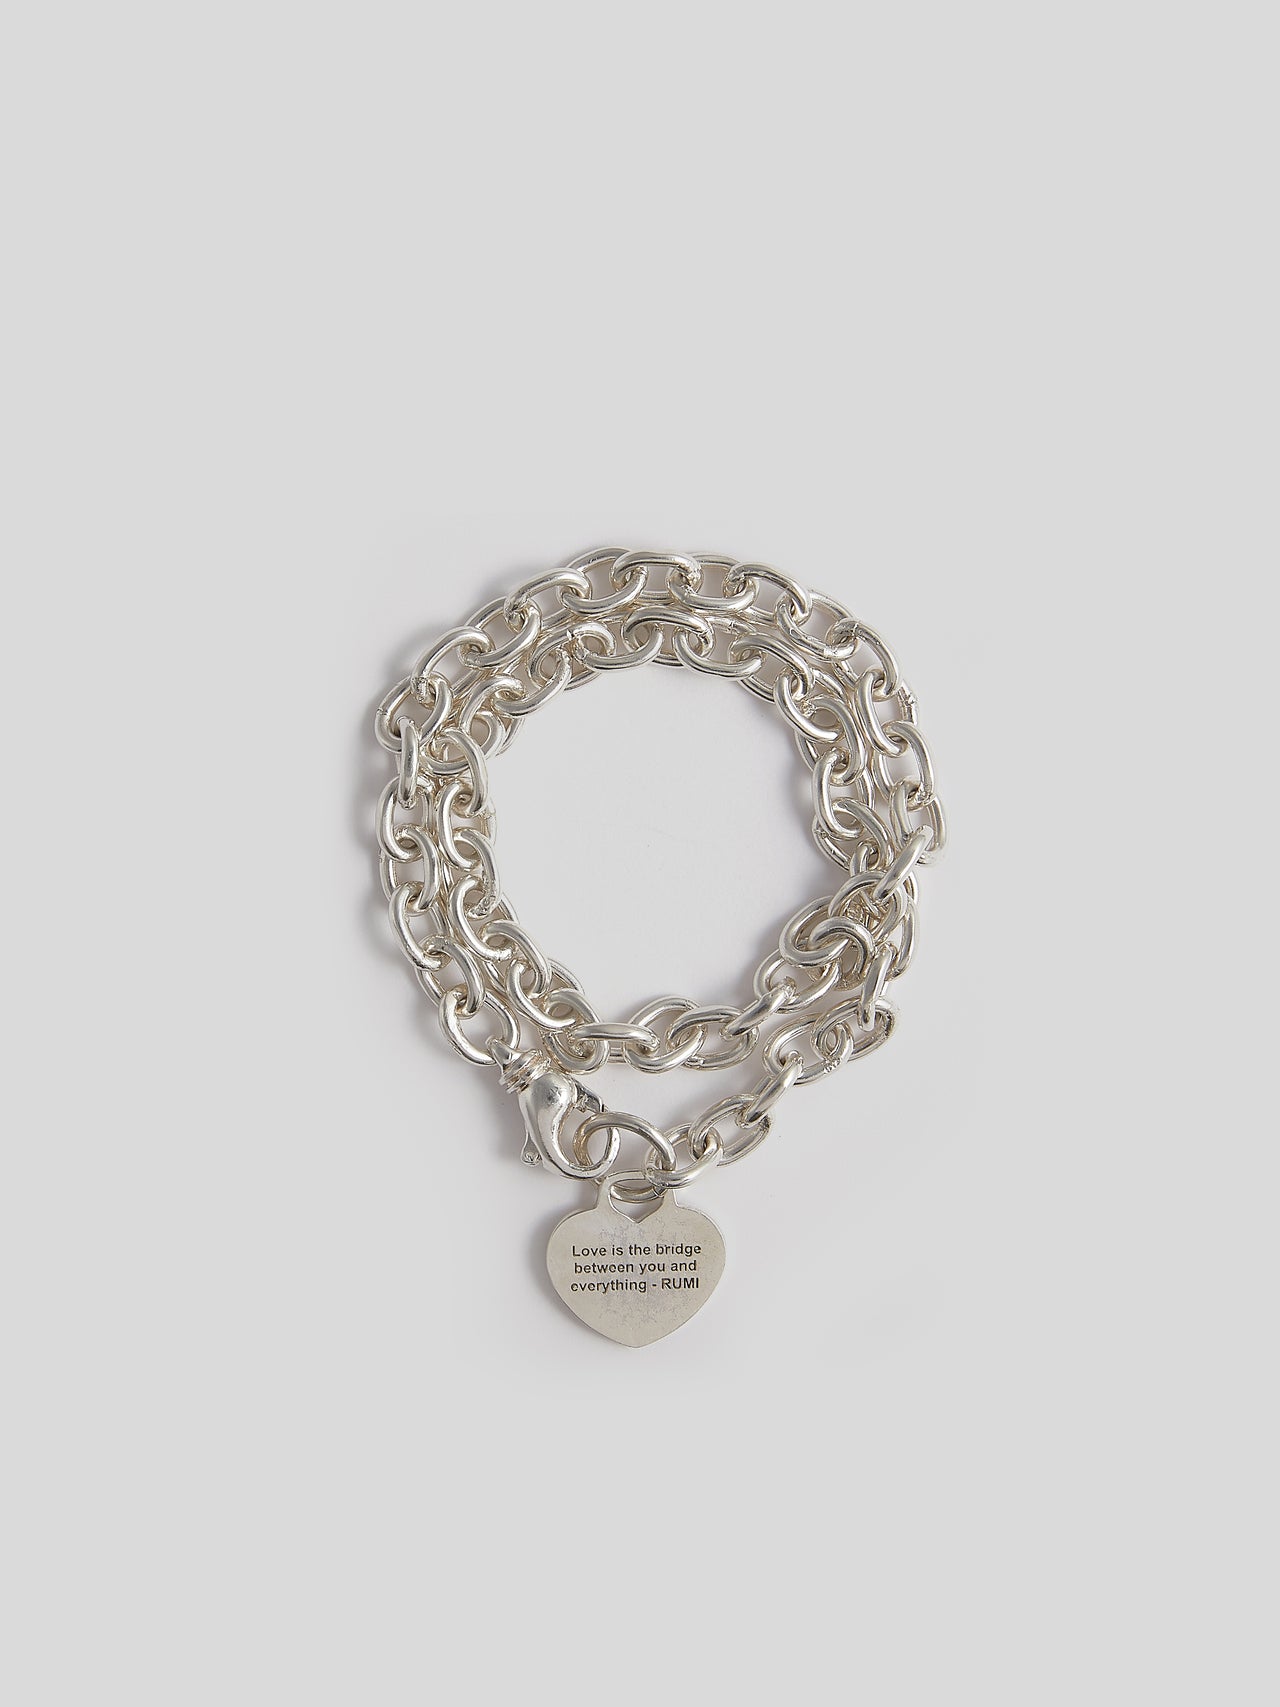 Sterling Silver Rumi Wrap Charm Bracelet pictured on light grey background. 